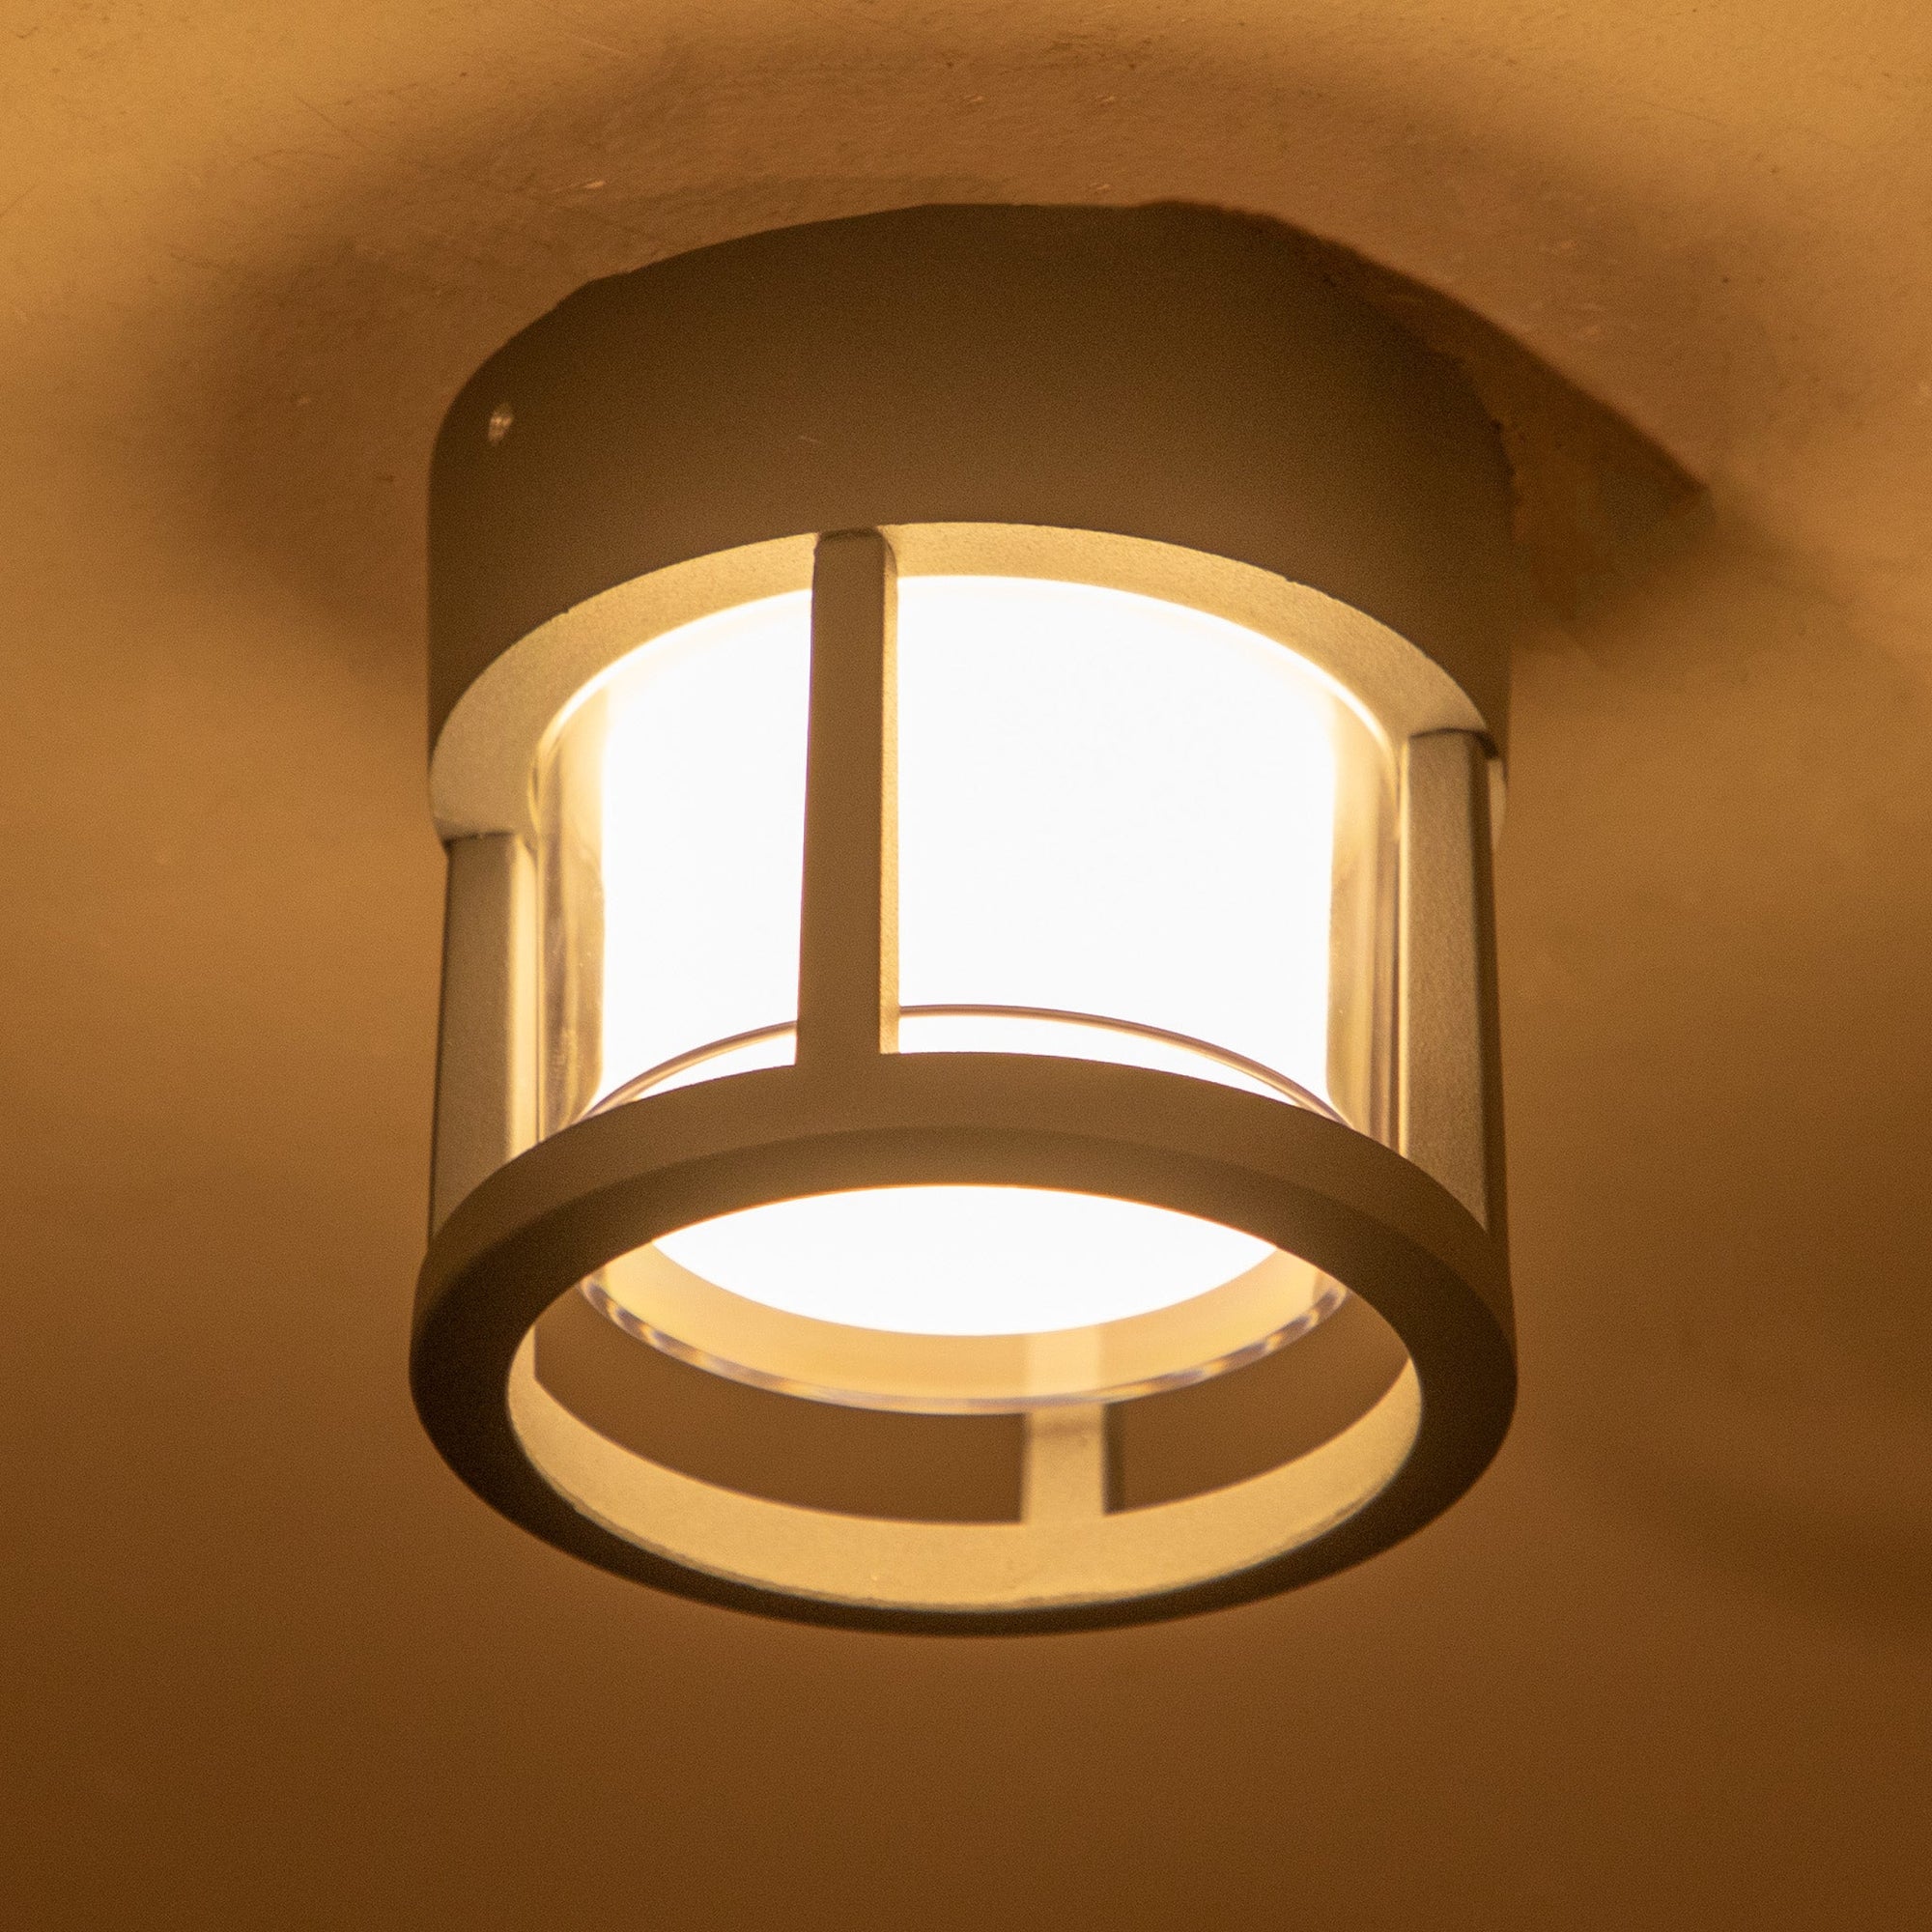 Shop United Round Outdoor LED Ceiling Light online